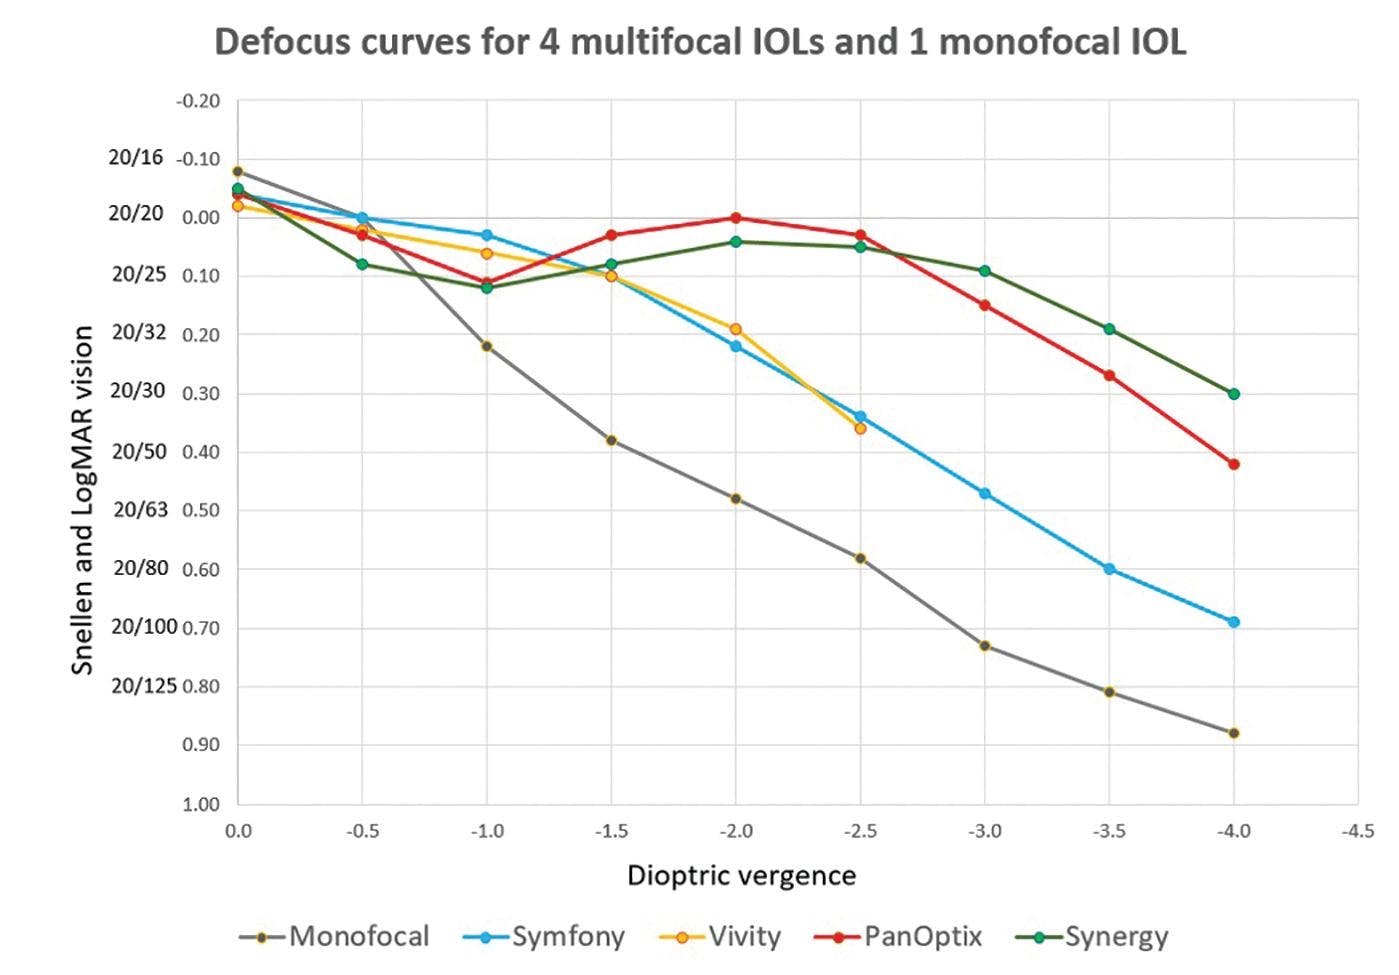 Figure 2: A defocus curve shows at a glance what the average patient should be able to see over a range of distances. Defocus curves are created by distance correcting the patient, then presenting a series of lenses in front of their eye and measuring the degree of defocus that is induced. Here are sample defocus curves for 4 multifocal IOLs (Symfony, Vivity, PanOptix, and Synergy) that are superimposed, although defocus curves often vary between studies.28-29 Bear in mind that superior defocus curves (ie, less defocus with near targets) are often accompanied by an increase in other optical issues..